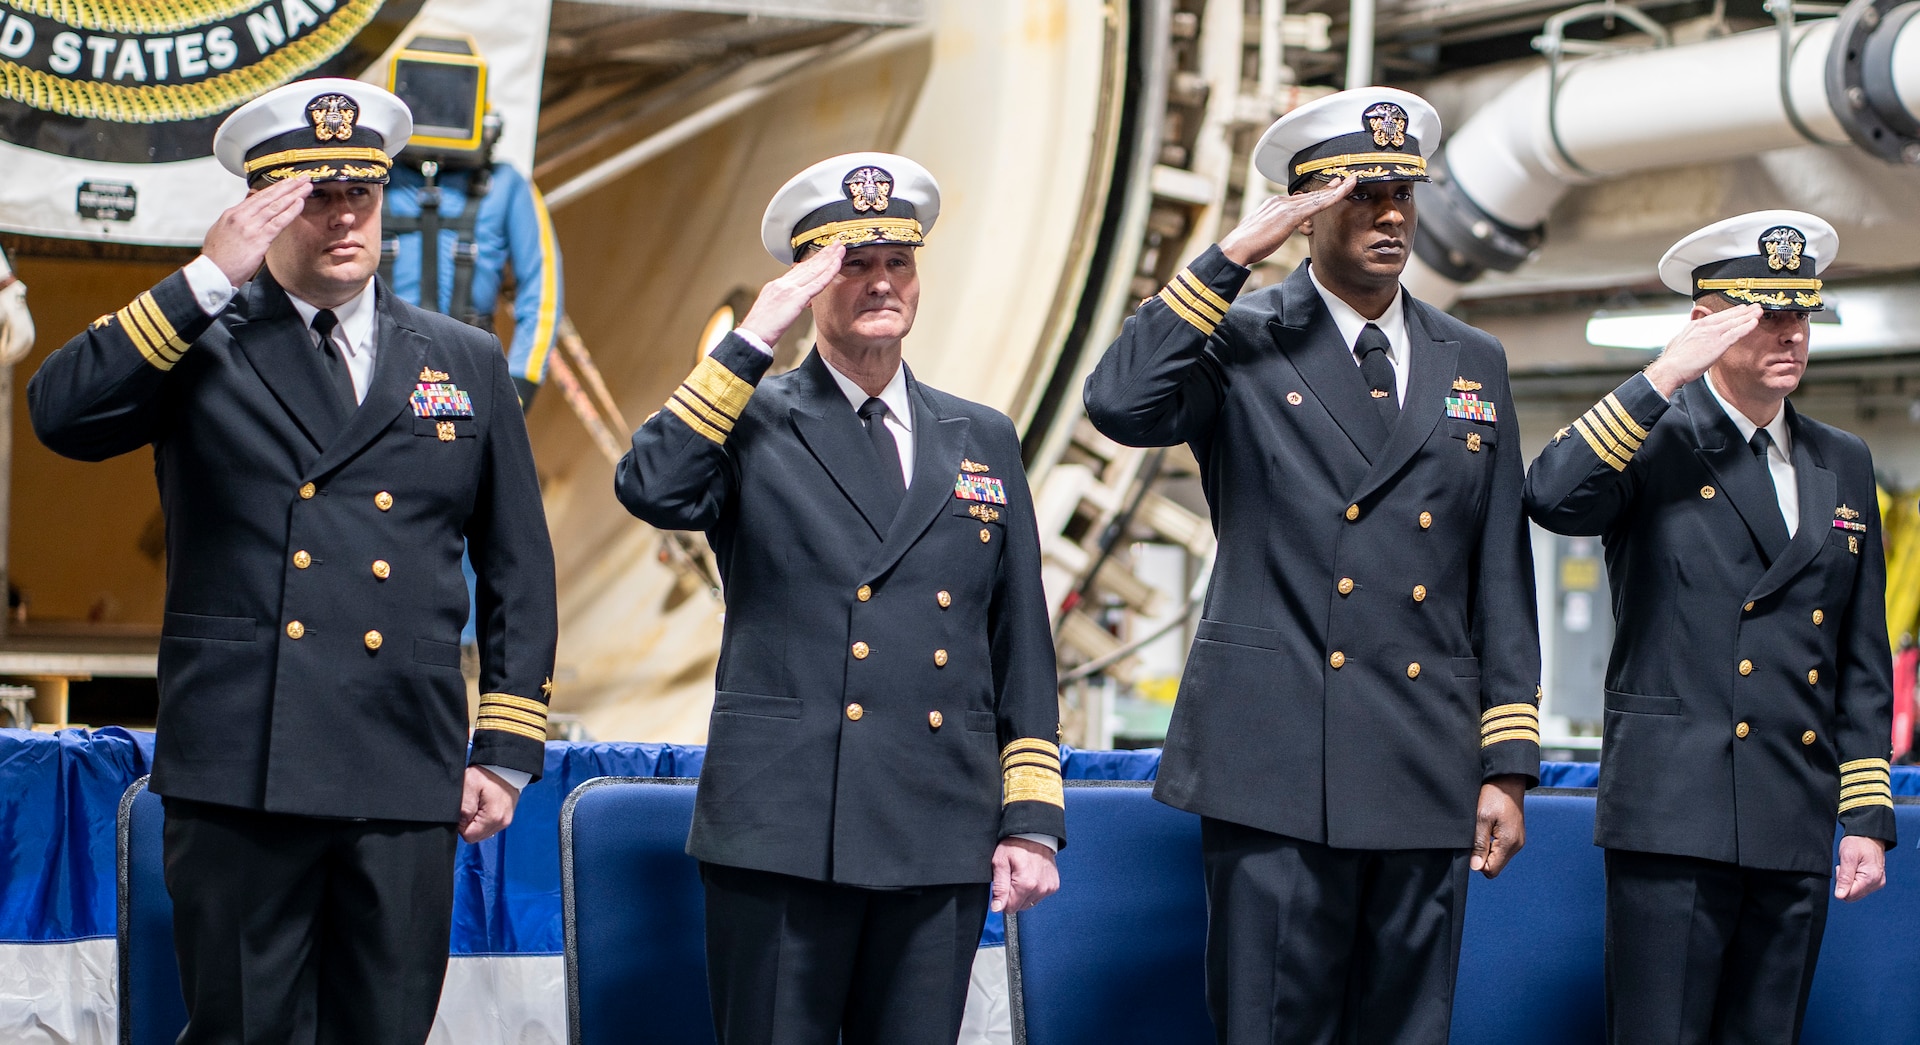 From left to right: CDR Dustin Cunningham, VADM William Galinis, CAPT (Sel) Kiah Rahming, and CAPT Jay salute the Ensign during the National Anthem.